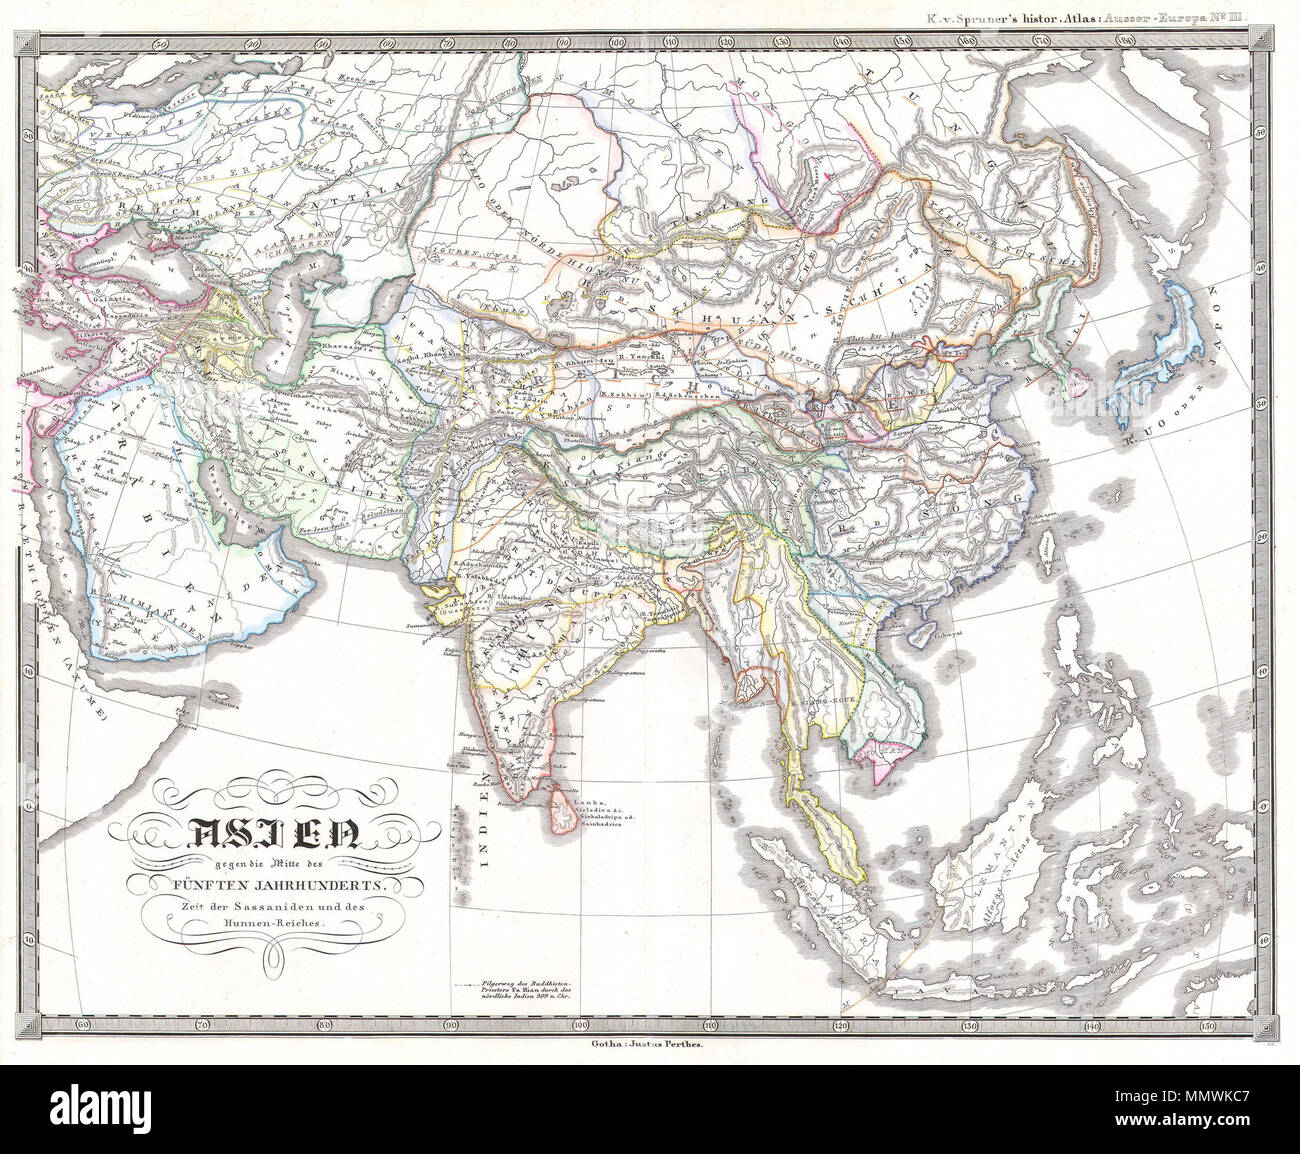 .  English: This fascinating hand colored map depicts Asia at the middle of the 5th century. This period corresponds with the period of the great Sassanid Empire and the Song dynasty of China. The Sassanid were a Zoroastrian Persian dynasty hailing from modern day Iran. All text is in German. Map was originally part of the 1855 edition of Karl von Spruner’s Historical Hand Atlas.  Asien gegen die Mitte des Funften Jahrhunderts. Zeit der Sassaniden und des Hunnen-Reiches.. 1855. 1855 Spruner Map of Asia in the 5th Century ( Sassanid Empire ) - Geographicus - AsienFunften-spruneri-1855 Stock Photo